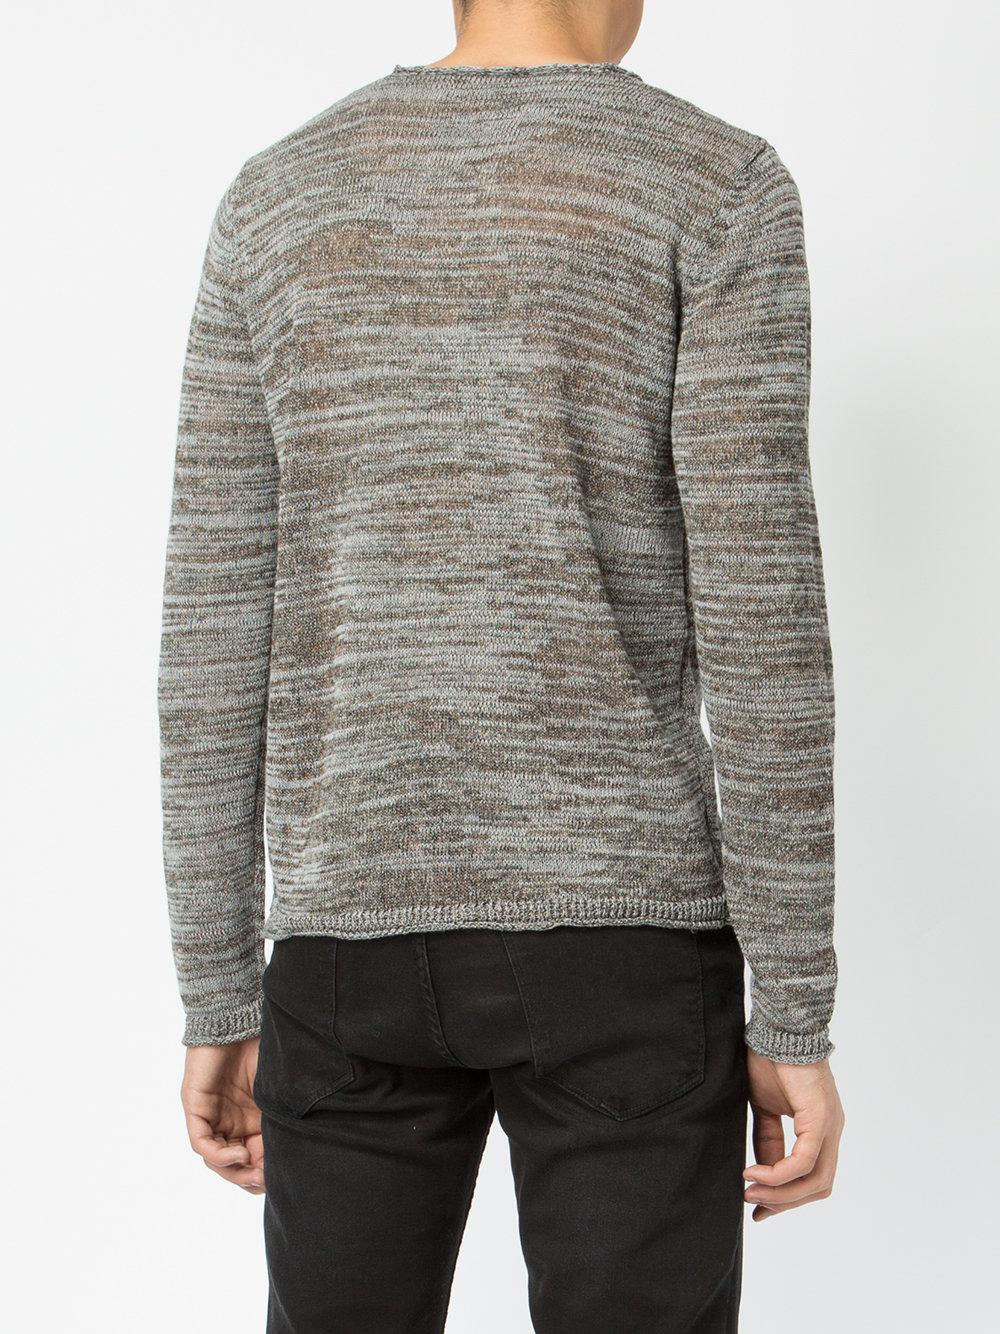 Roberto Collina Cotton Crew Neck Sweater in Brown for Men - Lyst